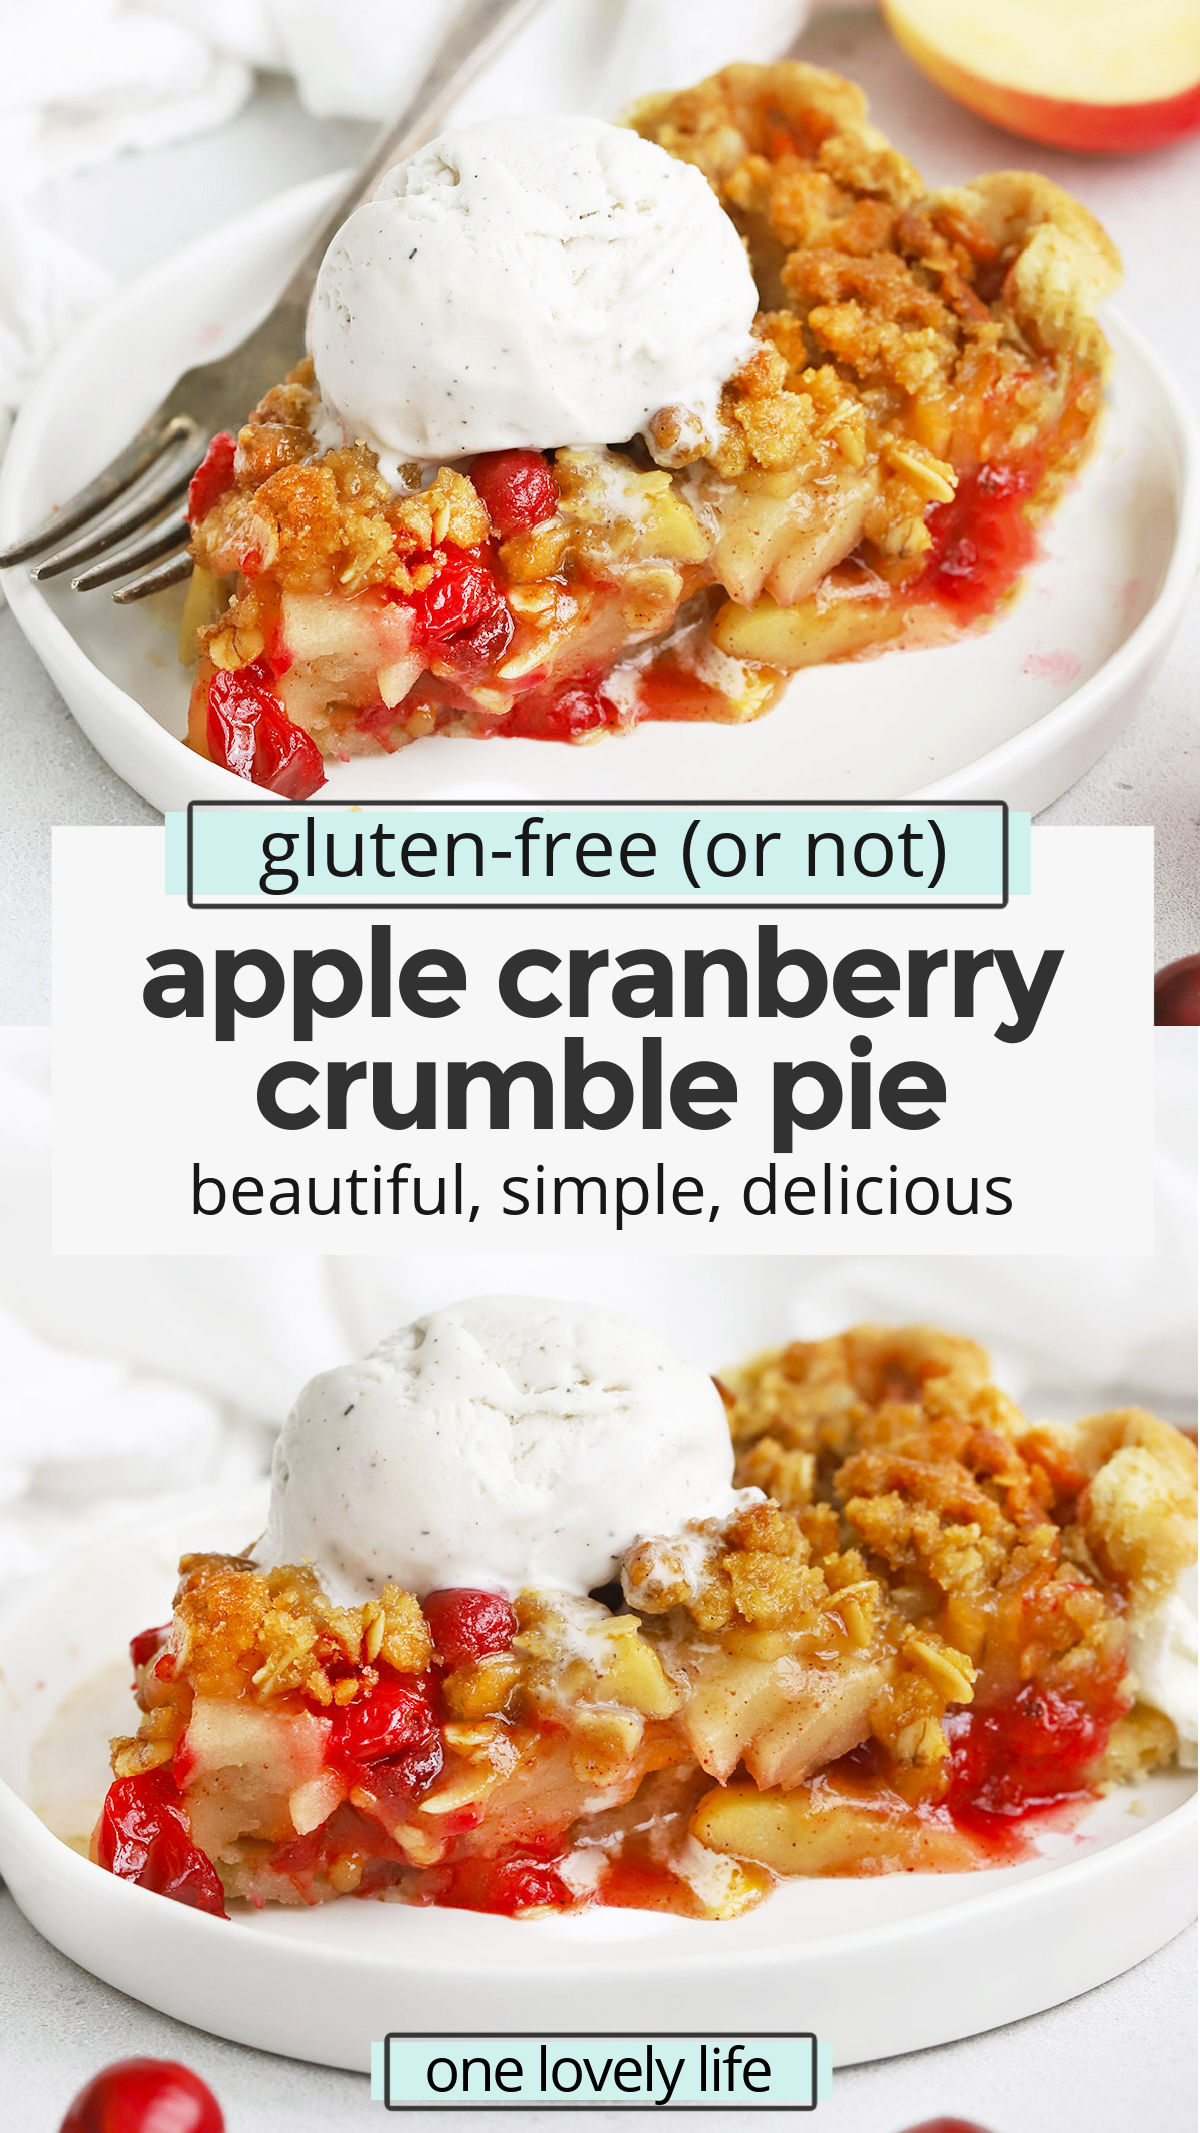 Apple Cranberry Crumble Pie - This Apple Cranberry Pie with crumble topping is what dreams are made of. (Gluten-Free + Vegan-Friendly!) // Cranberry Apple Pie // Fall Pie // Thanksgiving pie // Gluten-free pie // vegan pie // Gluten-Free Apple Cranberry Crumble Pie recipe